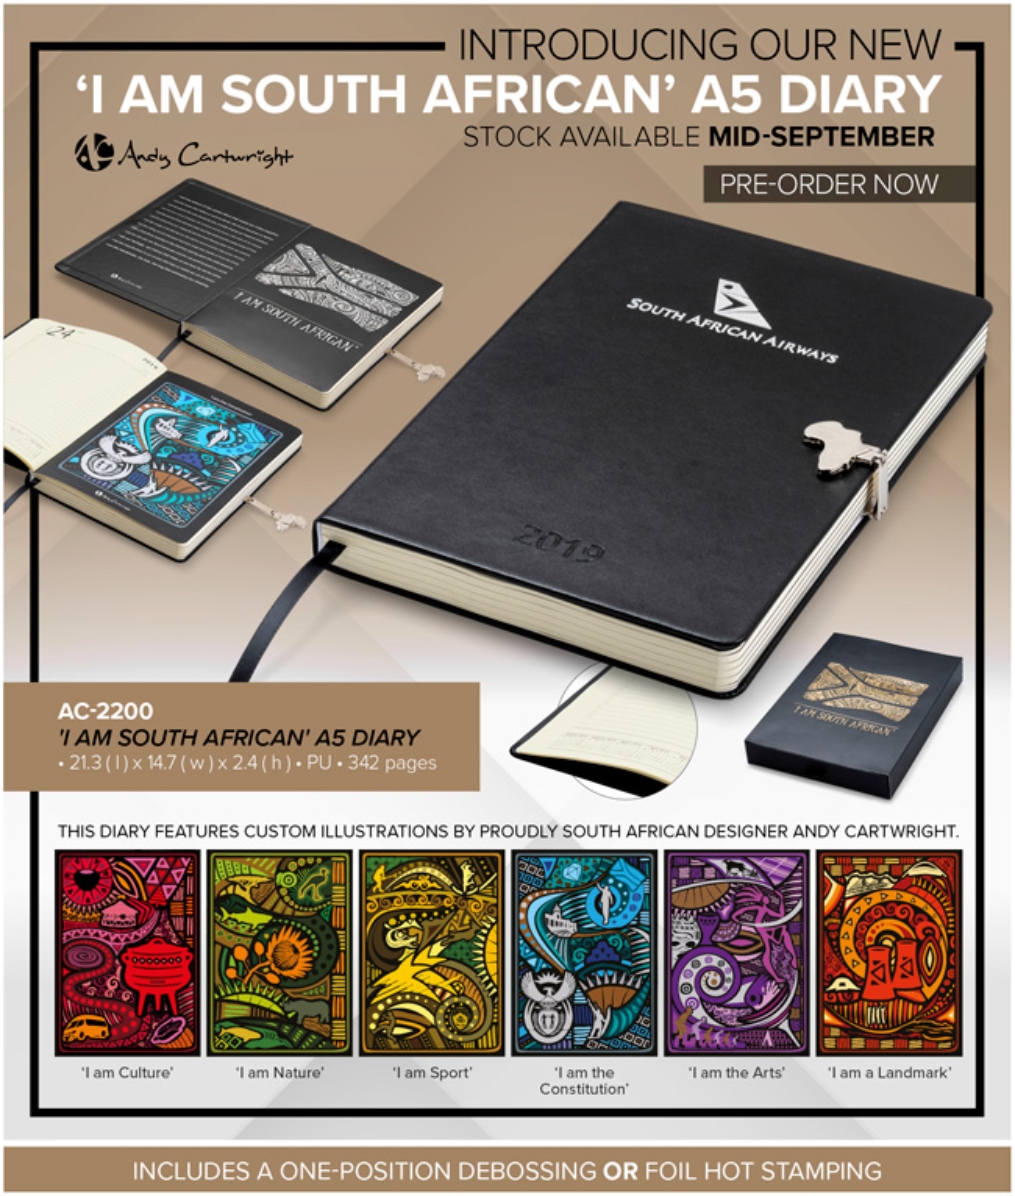 PRE ORDER OUR NEW I AM SOUTH AFRICAN A5 DIARY TODAY